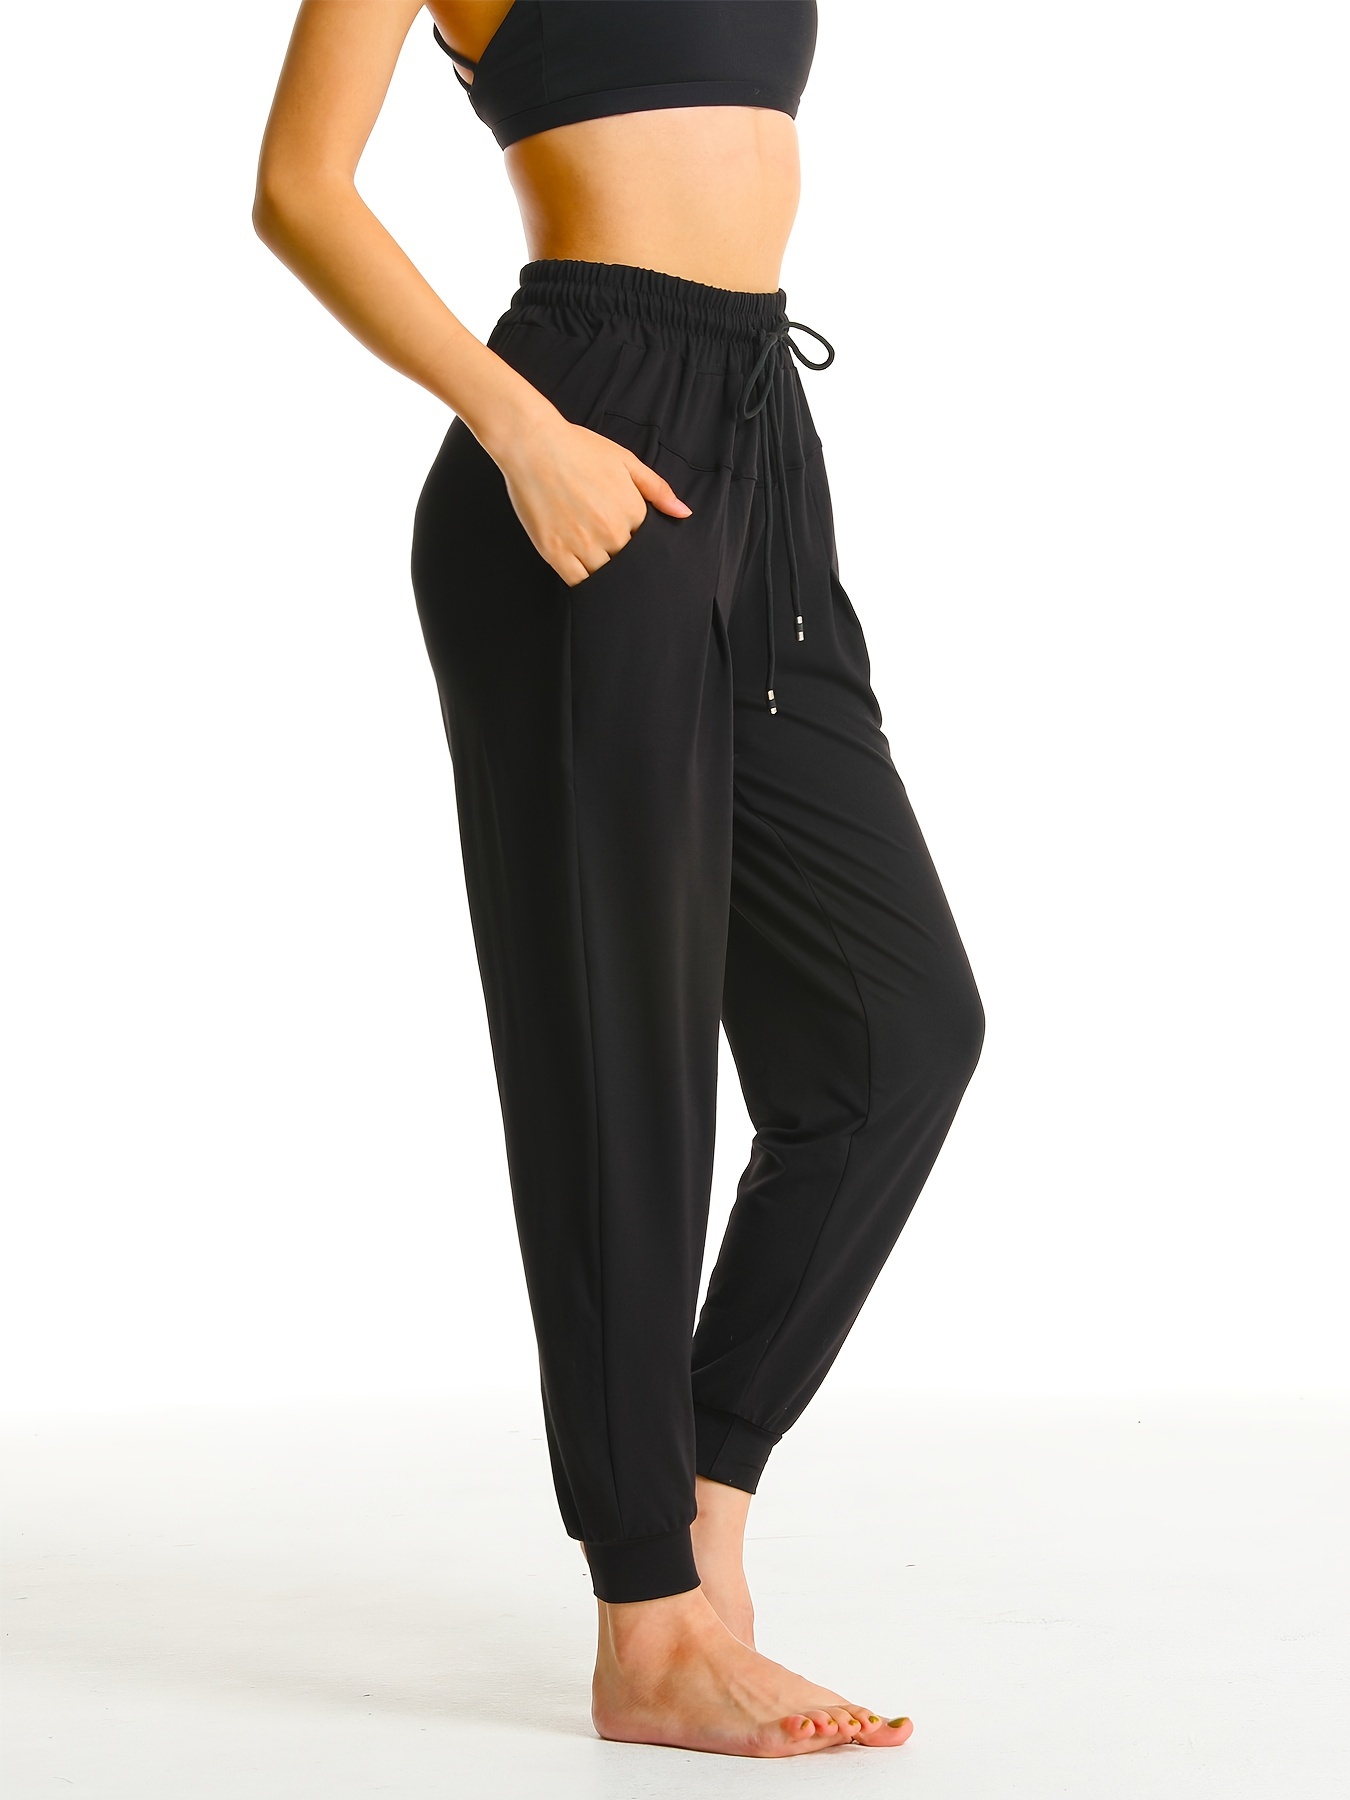 Lole Drawstring Athletic Pants for Women